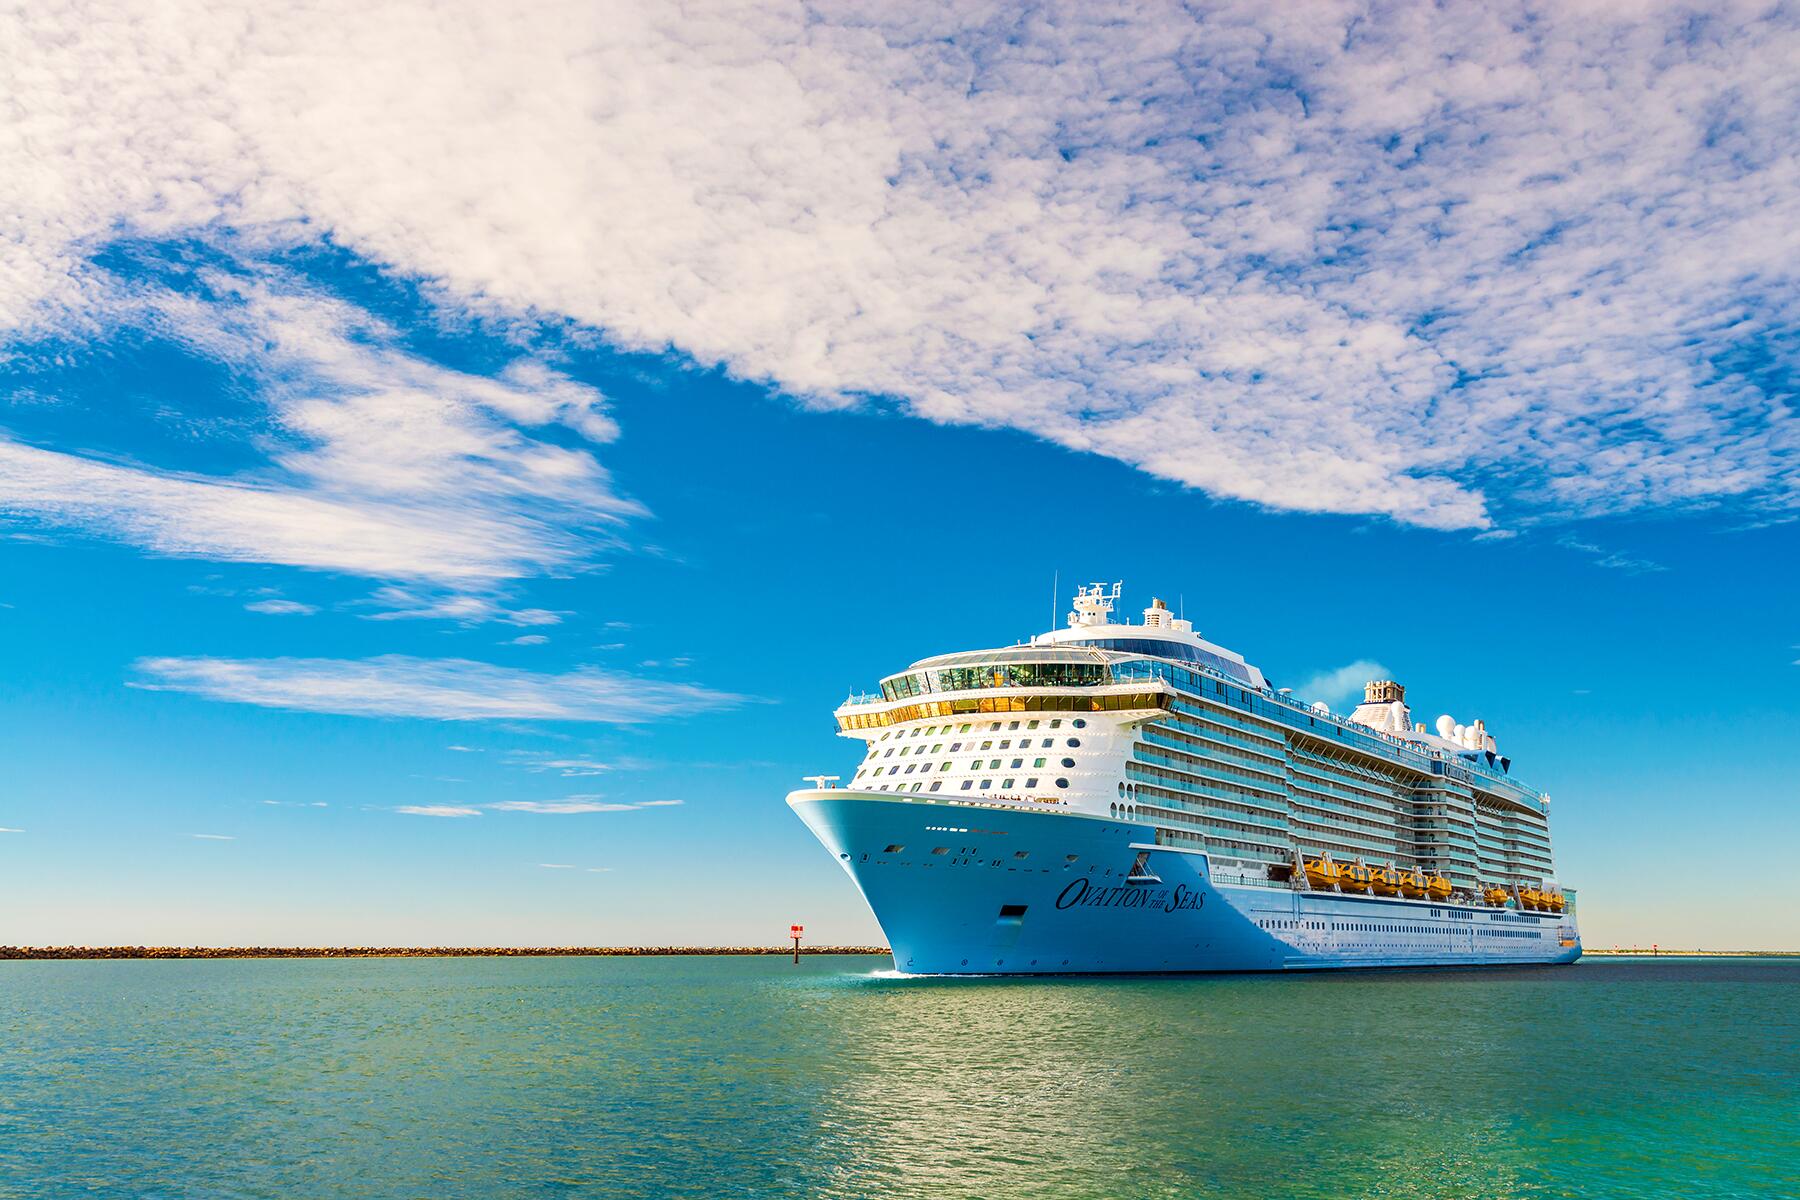 High Seas High Streets - the best cruise lines for shopping at sea 